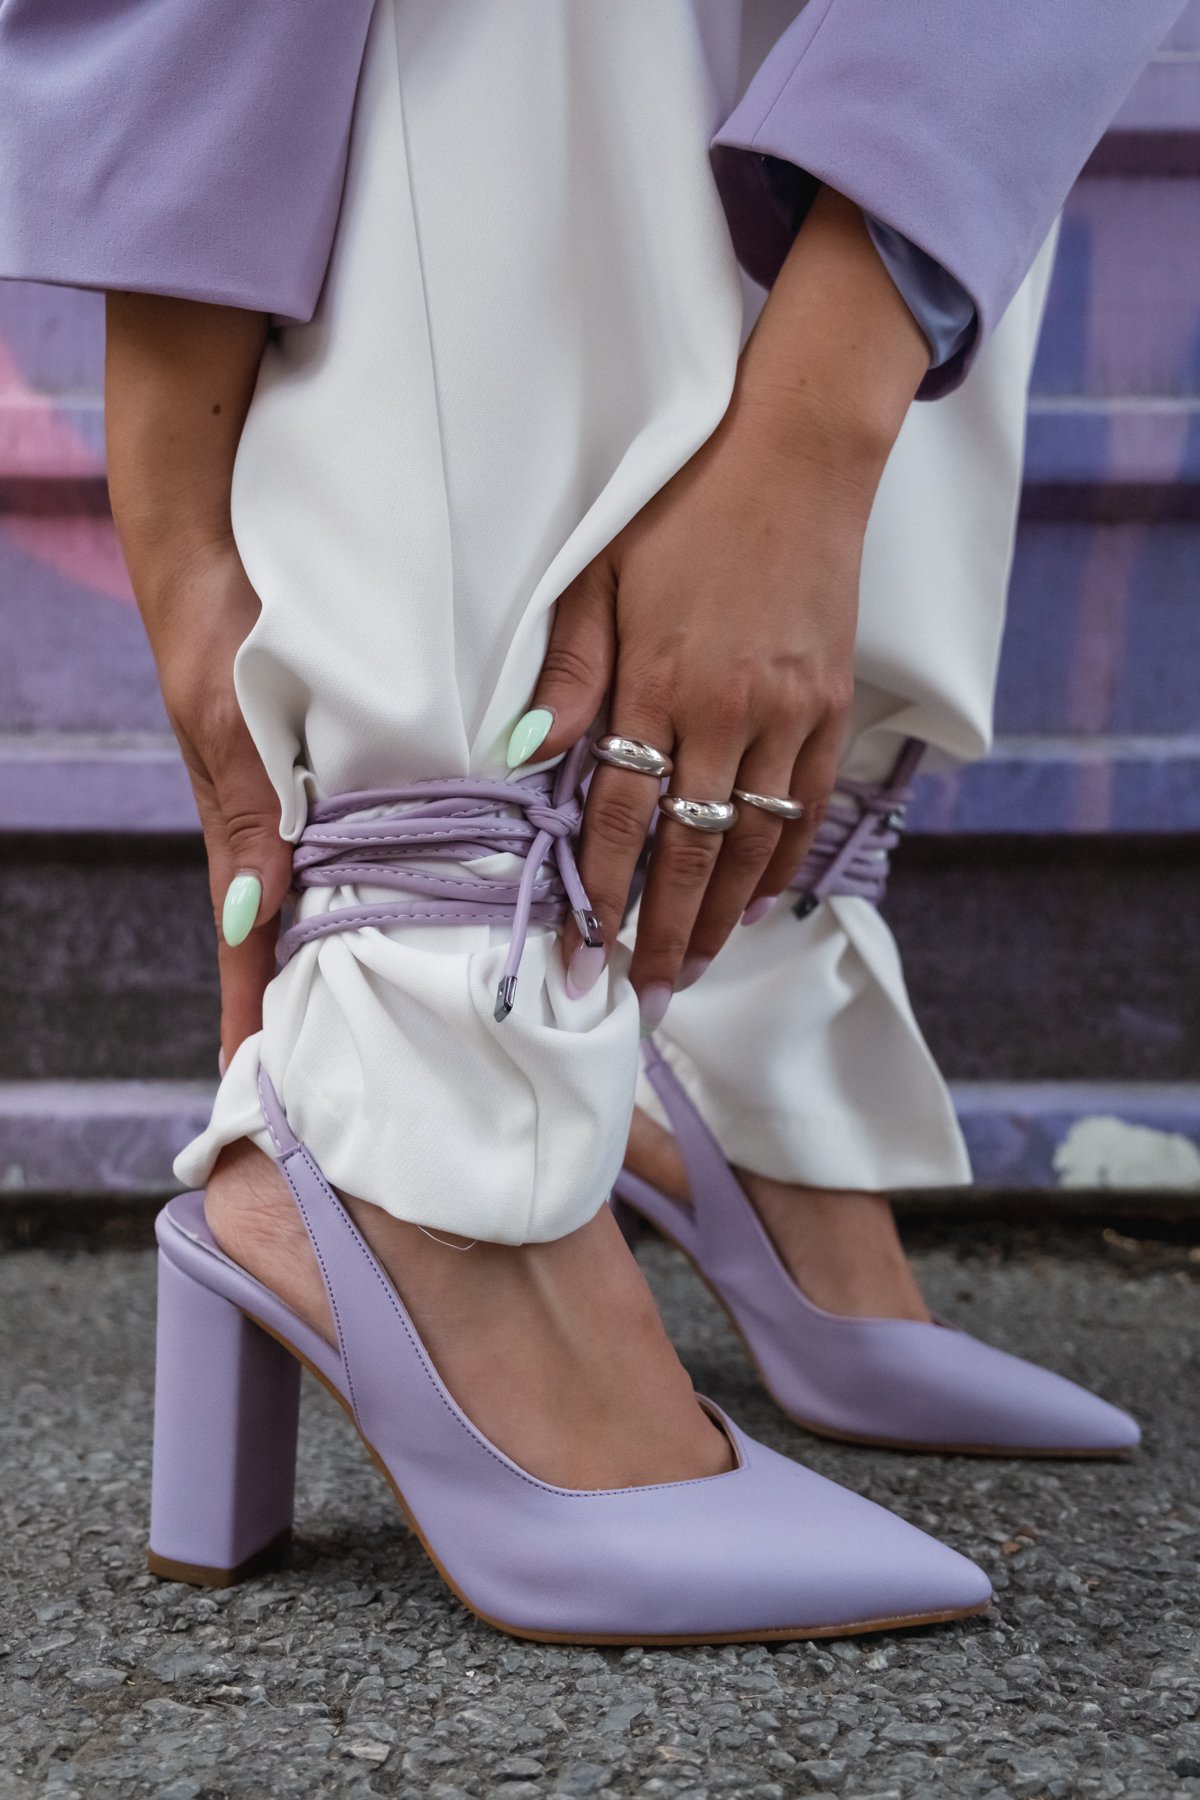 Lilac Fashionable Stiletto Peep Toe With Marine Golden Details Stock Photo  - Download Image Now - iStock